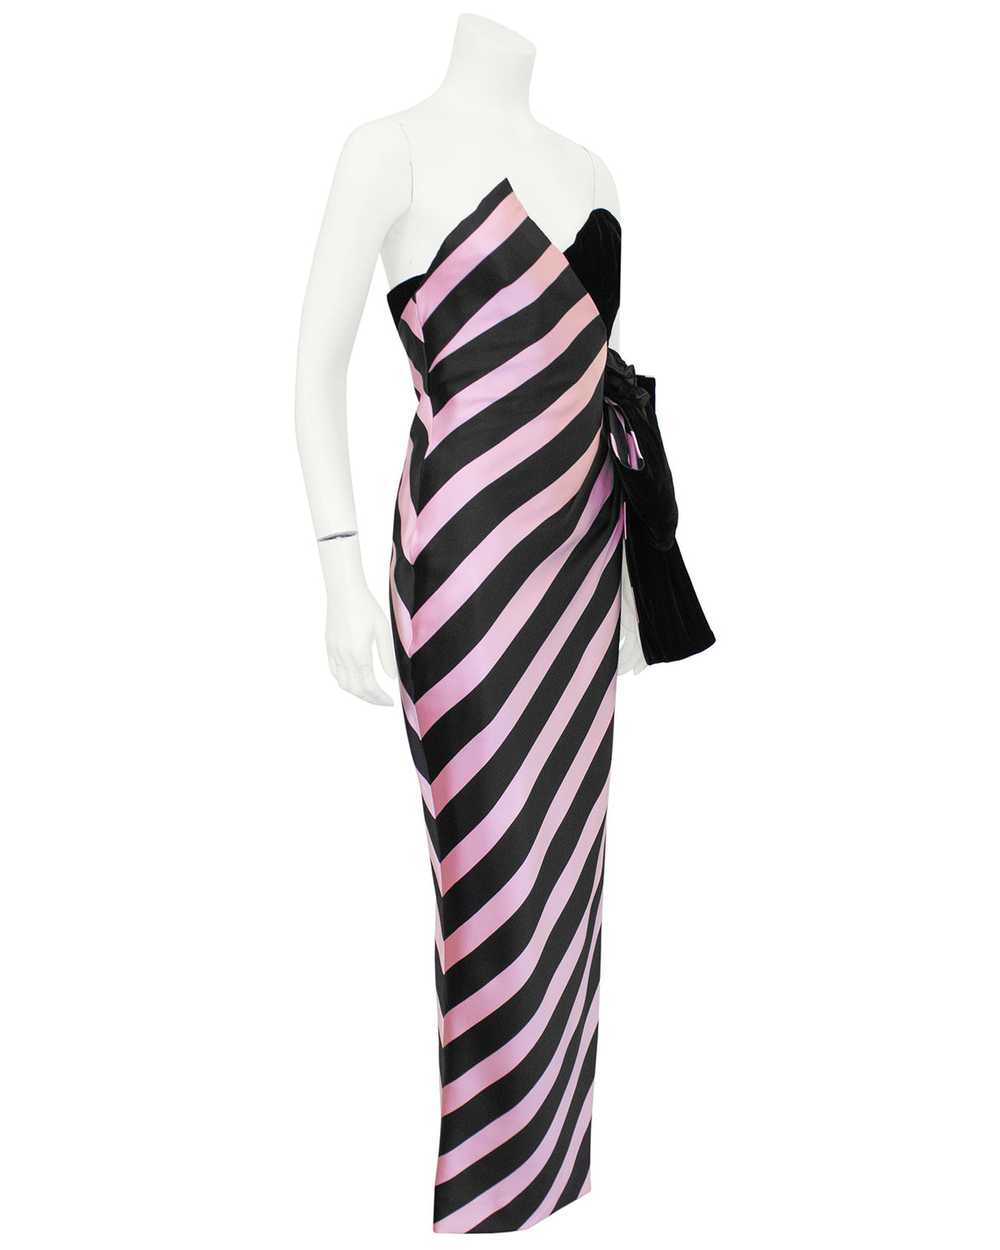 Belleville Sasoon Black and Pink Strapless Gown - image 1